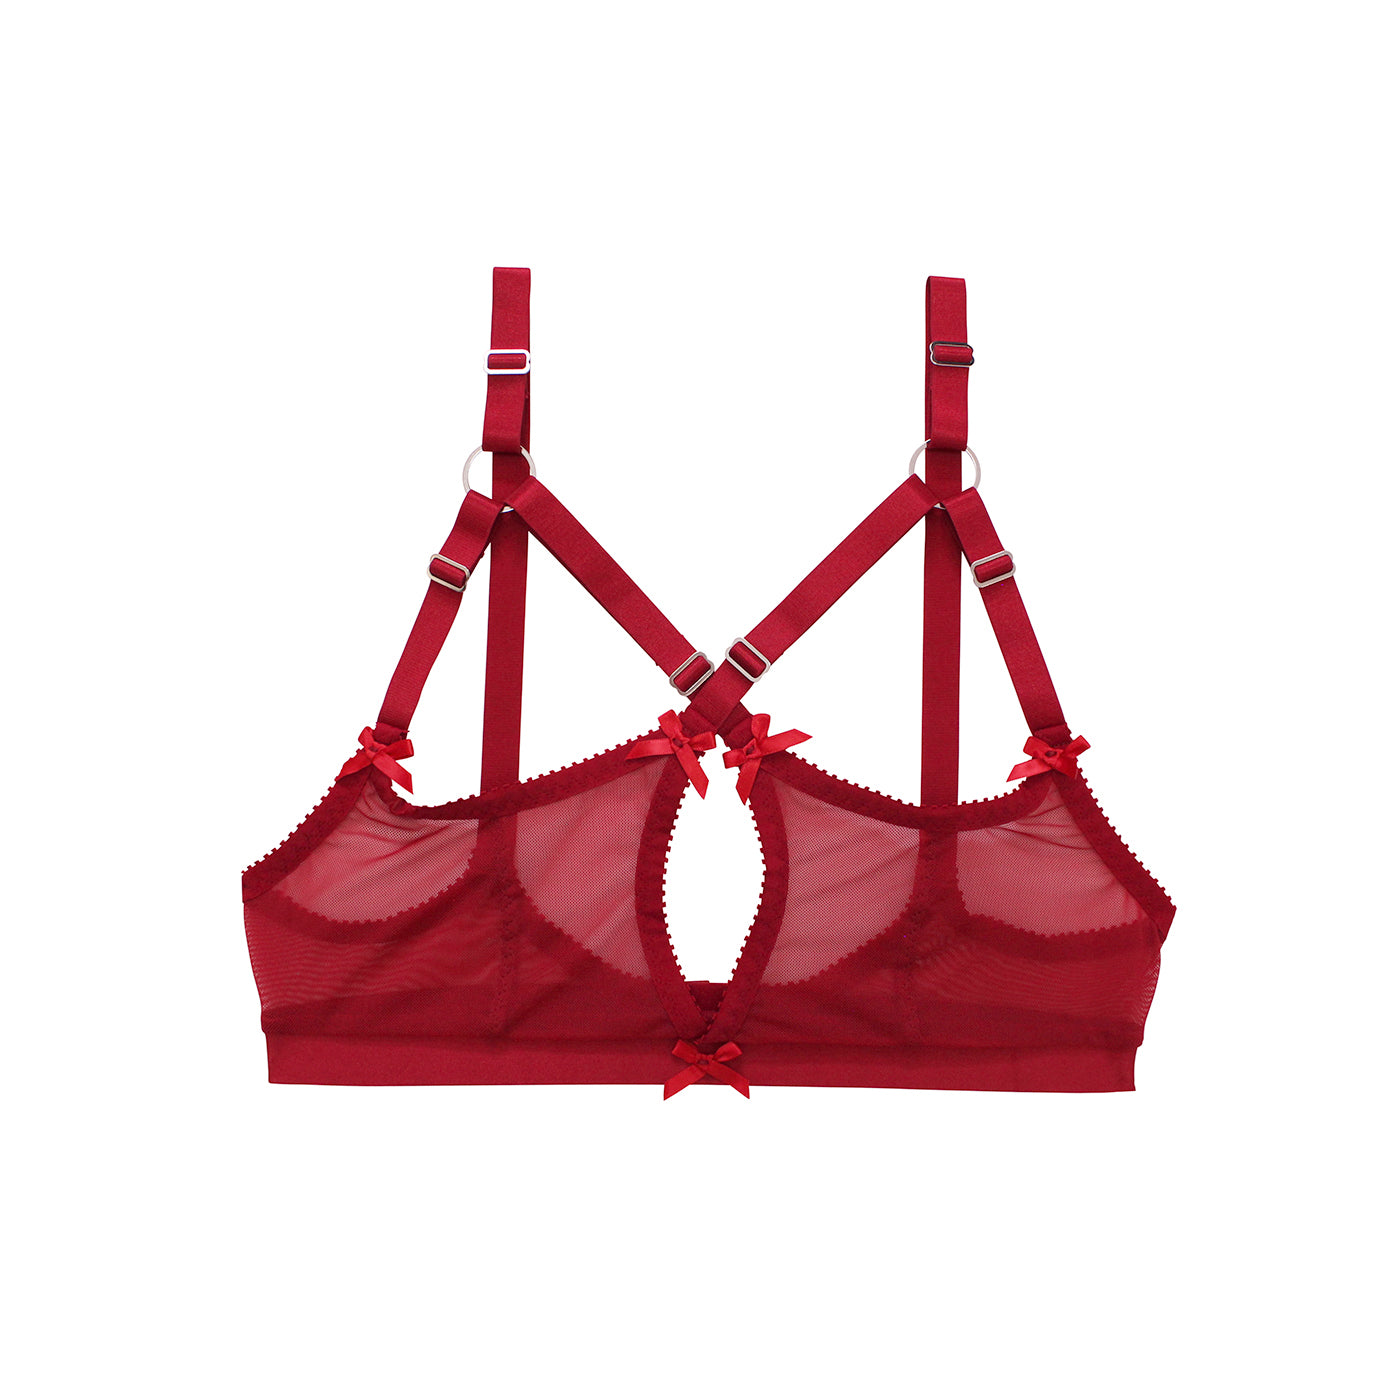 Strappy Red Bralette  Ethical Lingerie Australian Made by